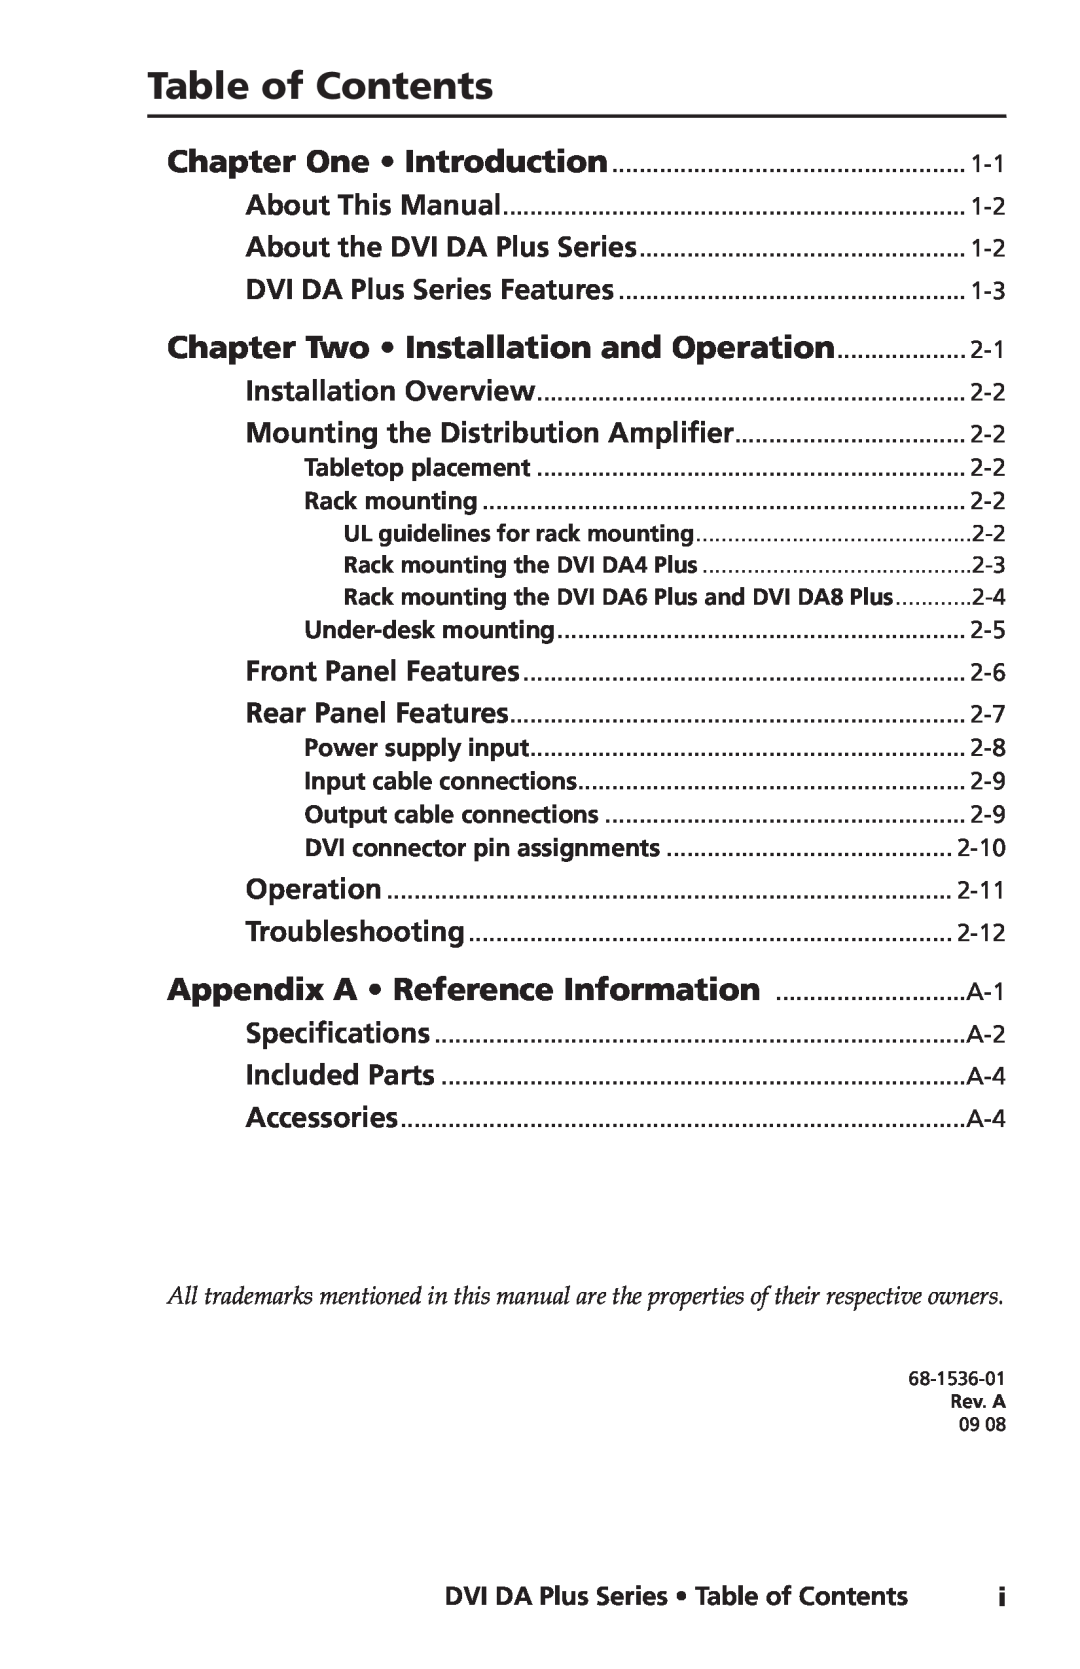 Extron electronic DVI DA4 Plus Table of Contents, Chapter Two Installation and Operation, Appendix A Reference Information 